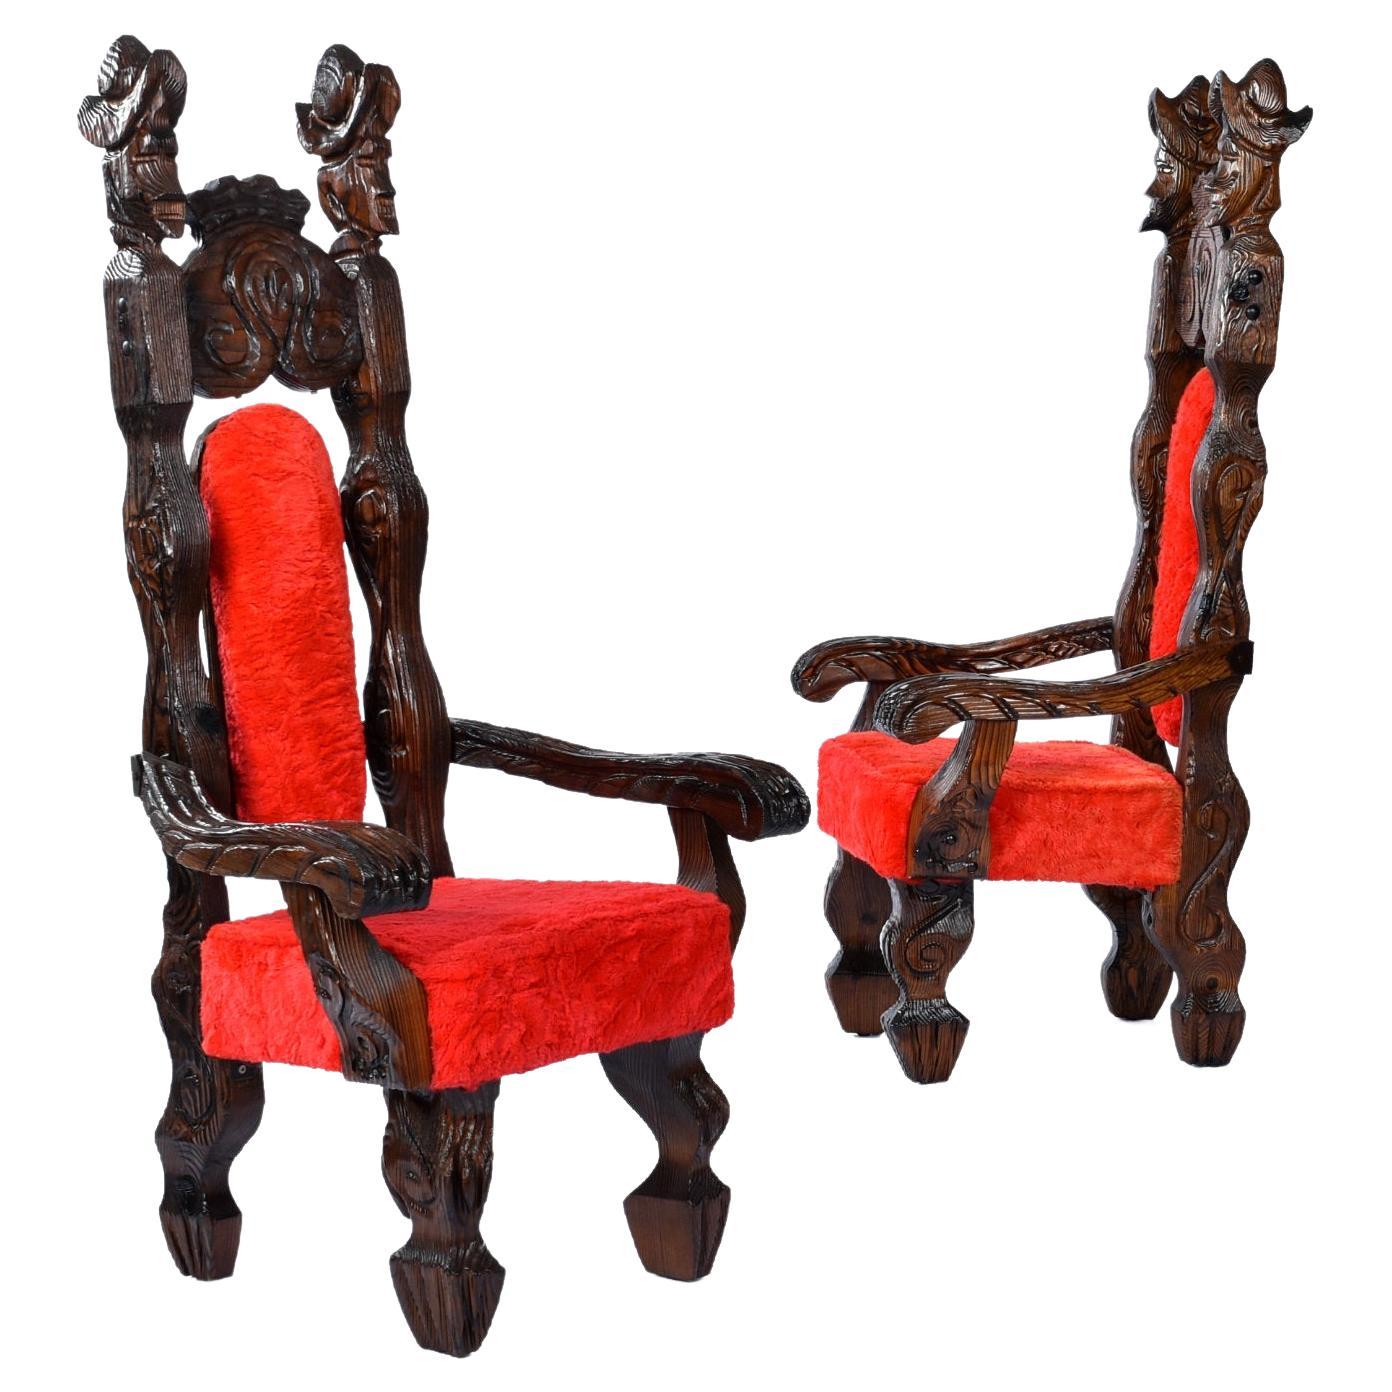 Pair of restored Witco Conquistador tiki throne chairs in original red fur. These chairs are absolutely wild in the best kind of way. The original red fur fabric has a thick pile. This bright red upholstery adds drama to the high-back, iron cladded,